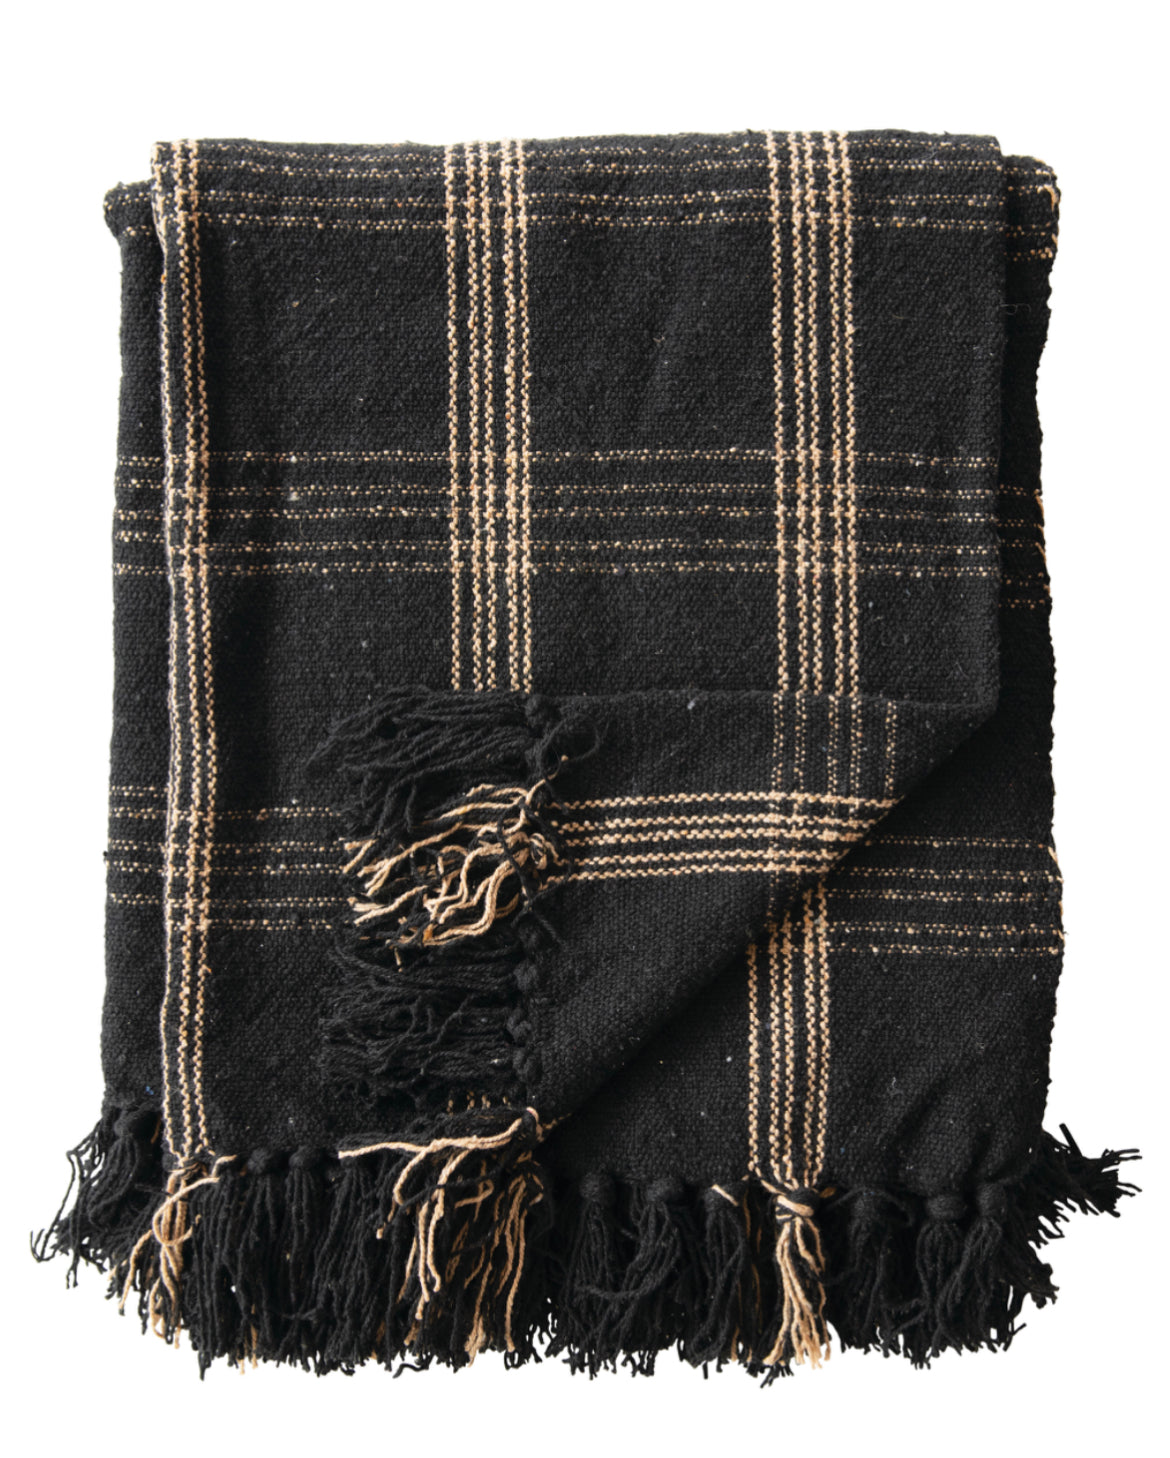 Black and Tan Woven Cotton Blend Throw with Fringe